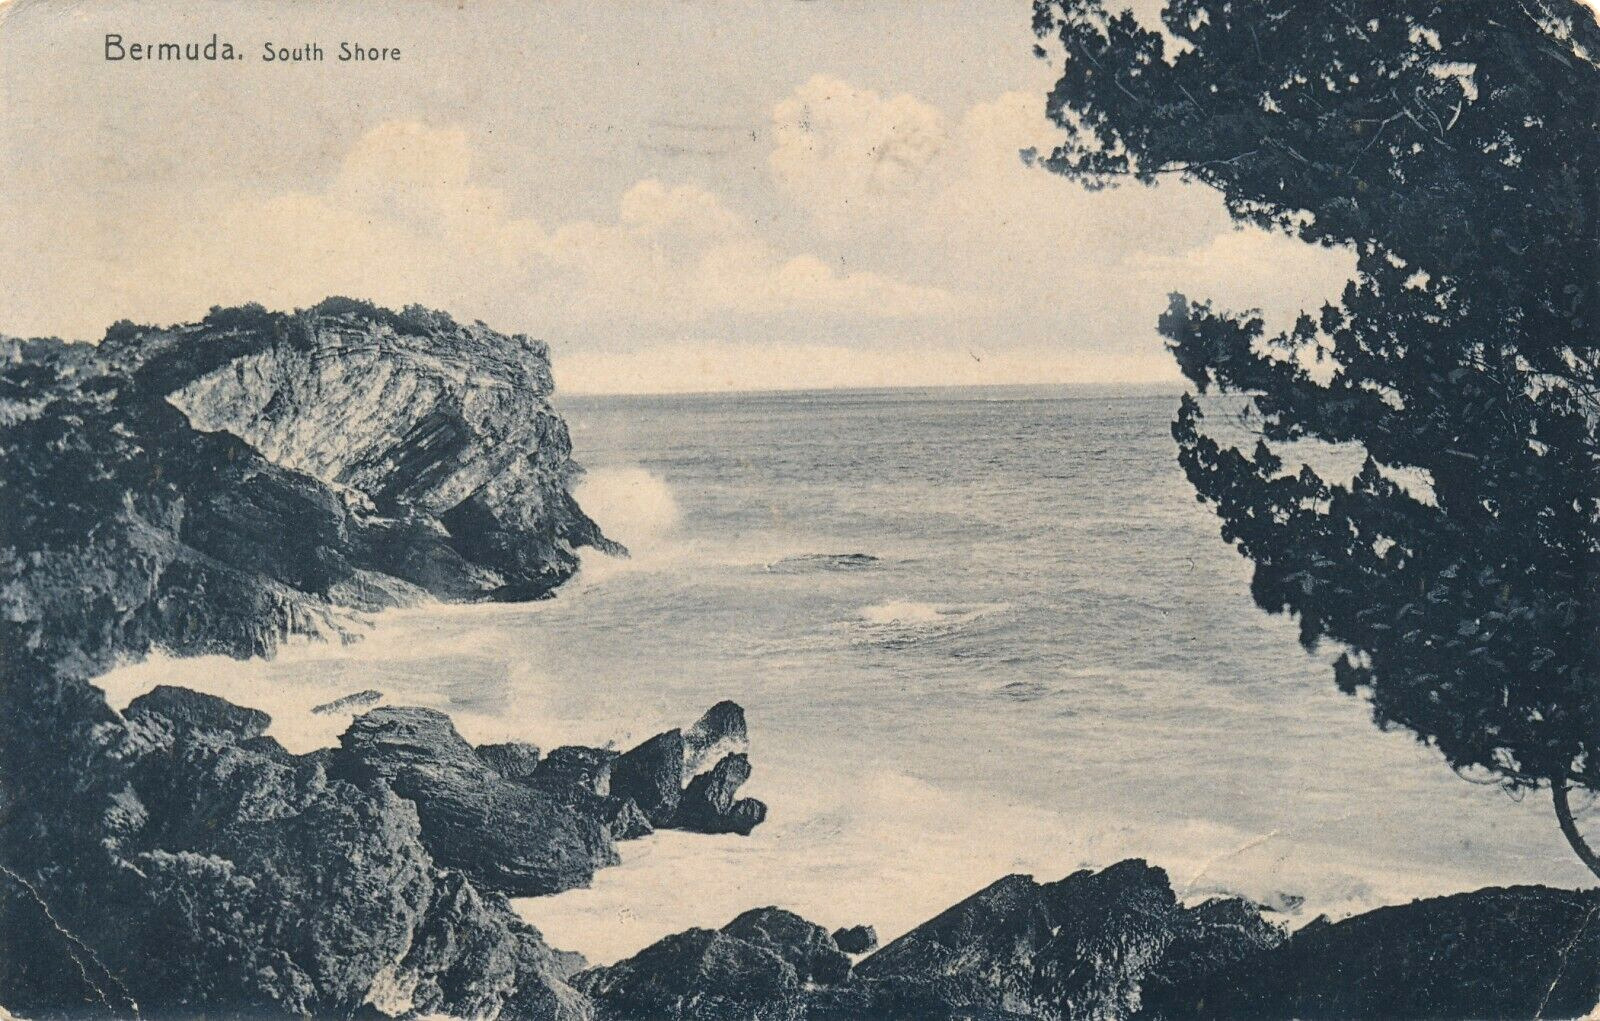 South Shore in Bermuda antique 1910 posted postcard